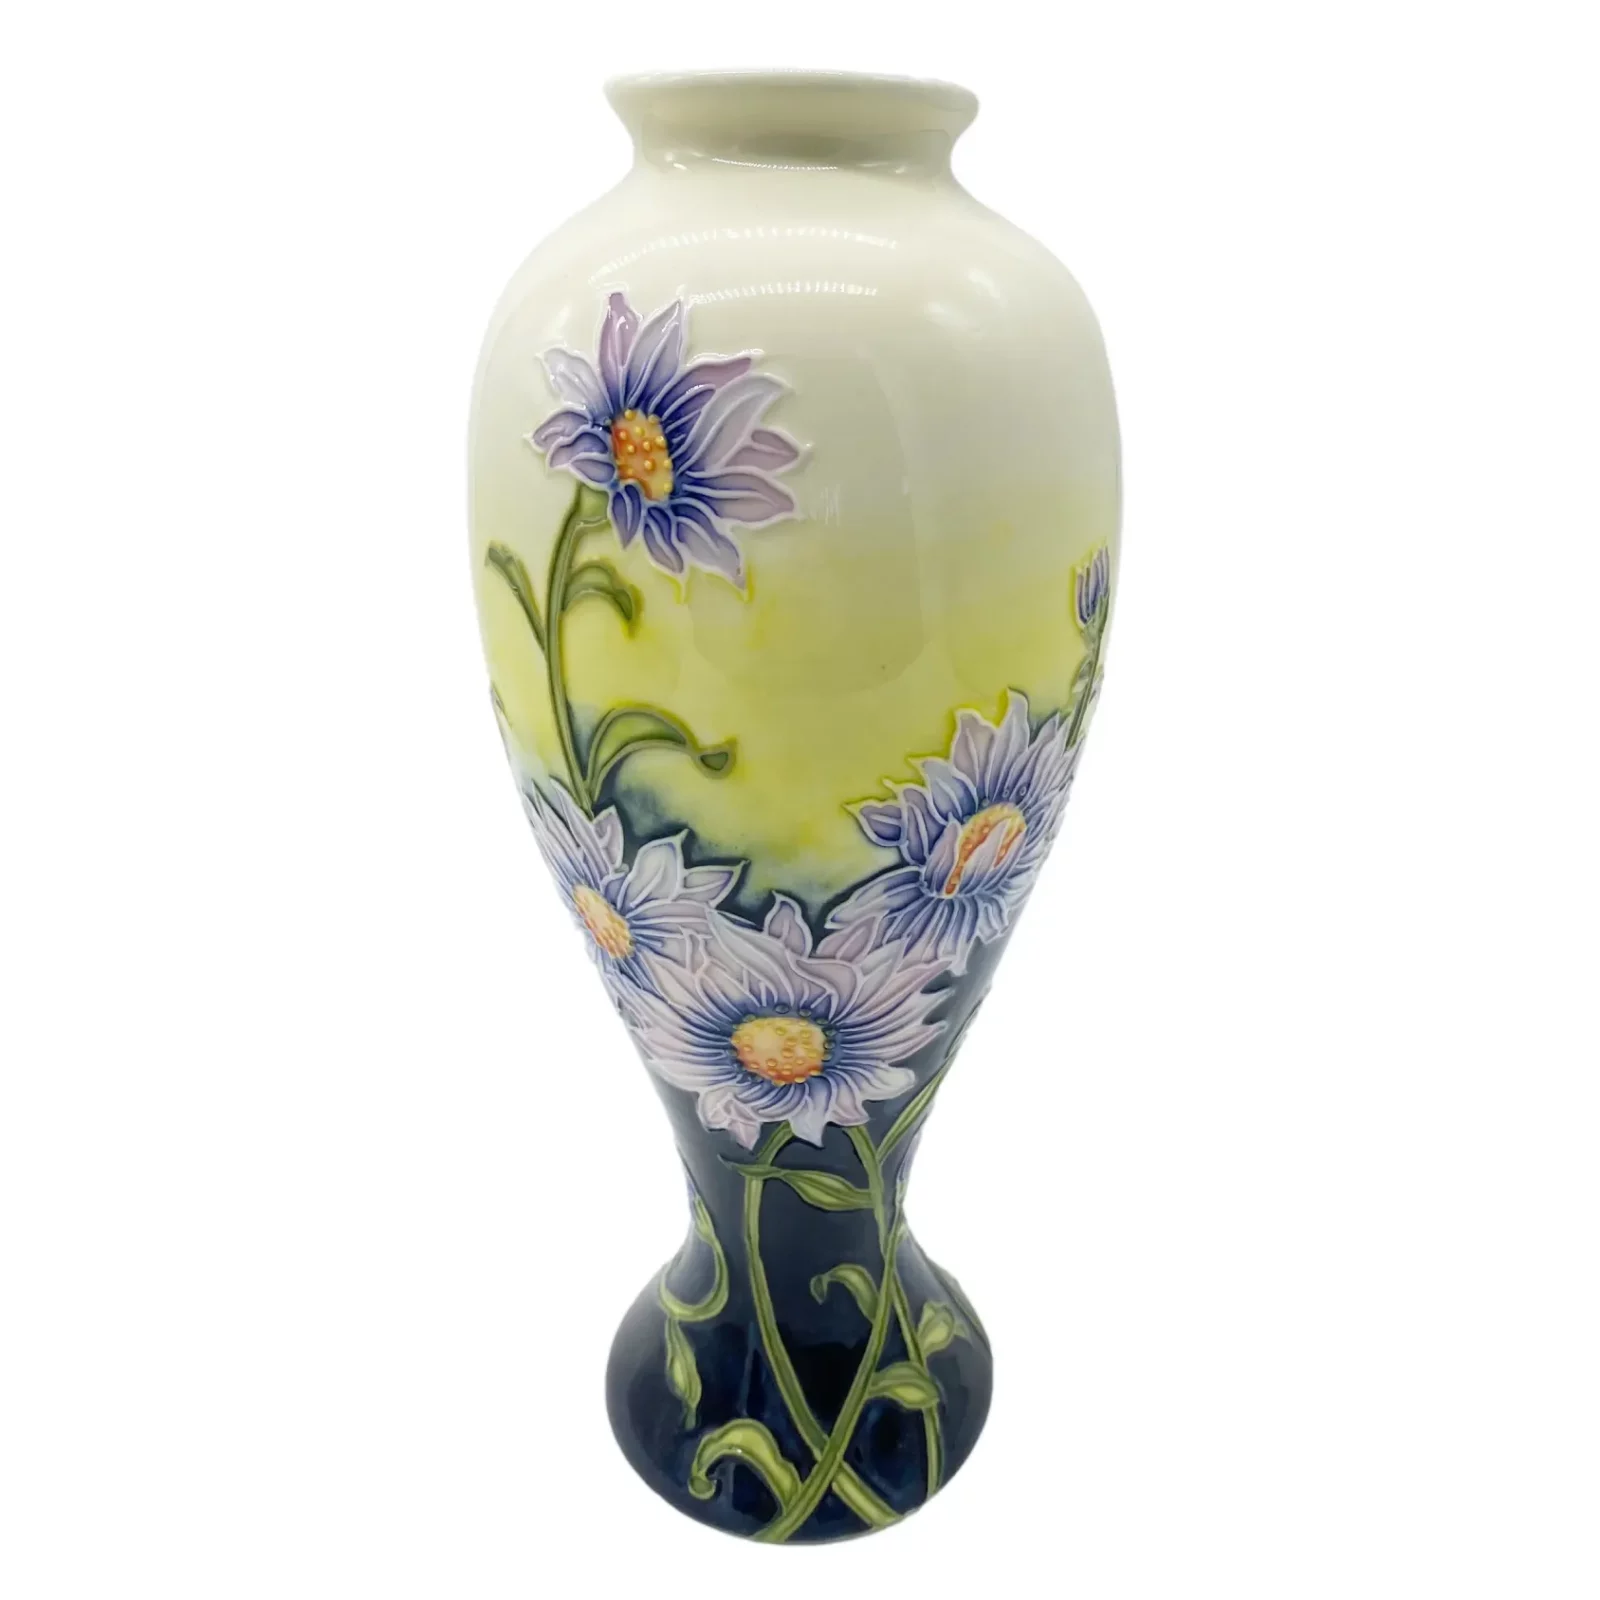 Pretty Lilac Daisy flowers surround this tube lined pottery piece hints of yellow and cream background